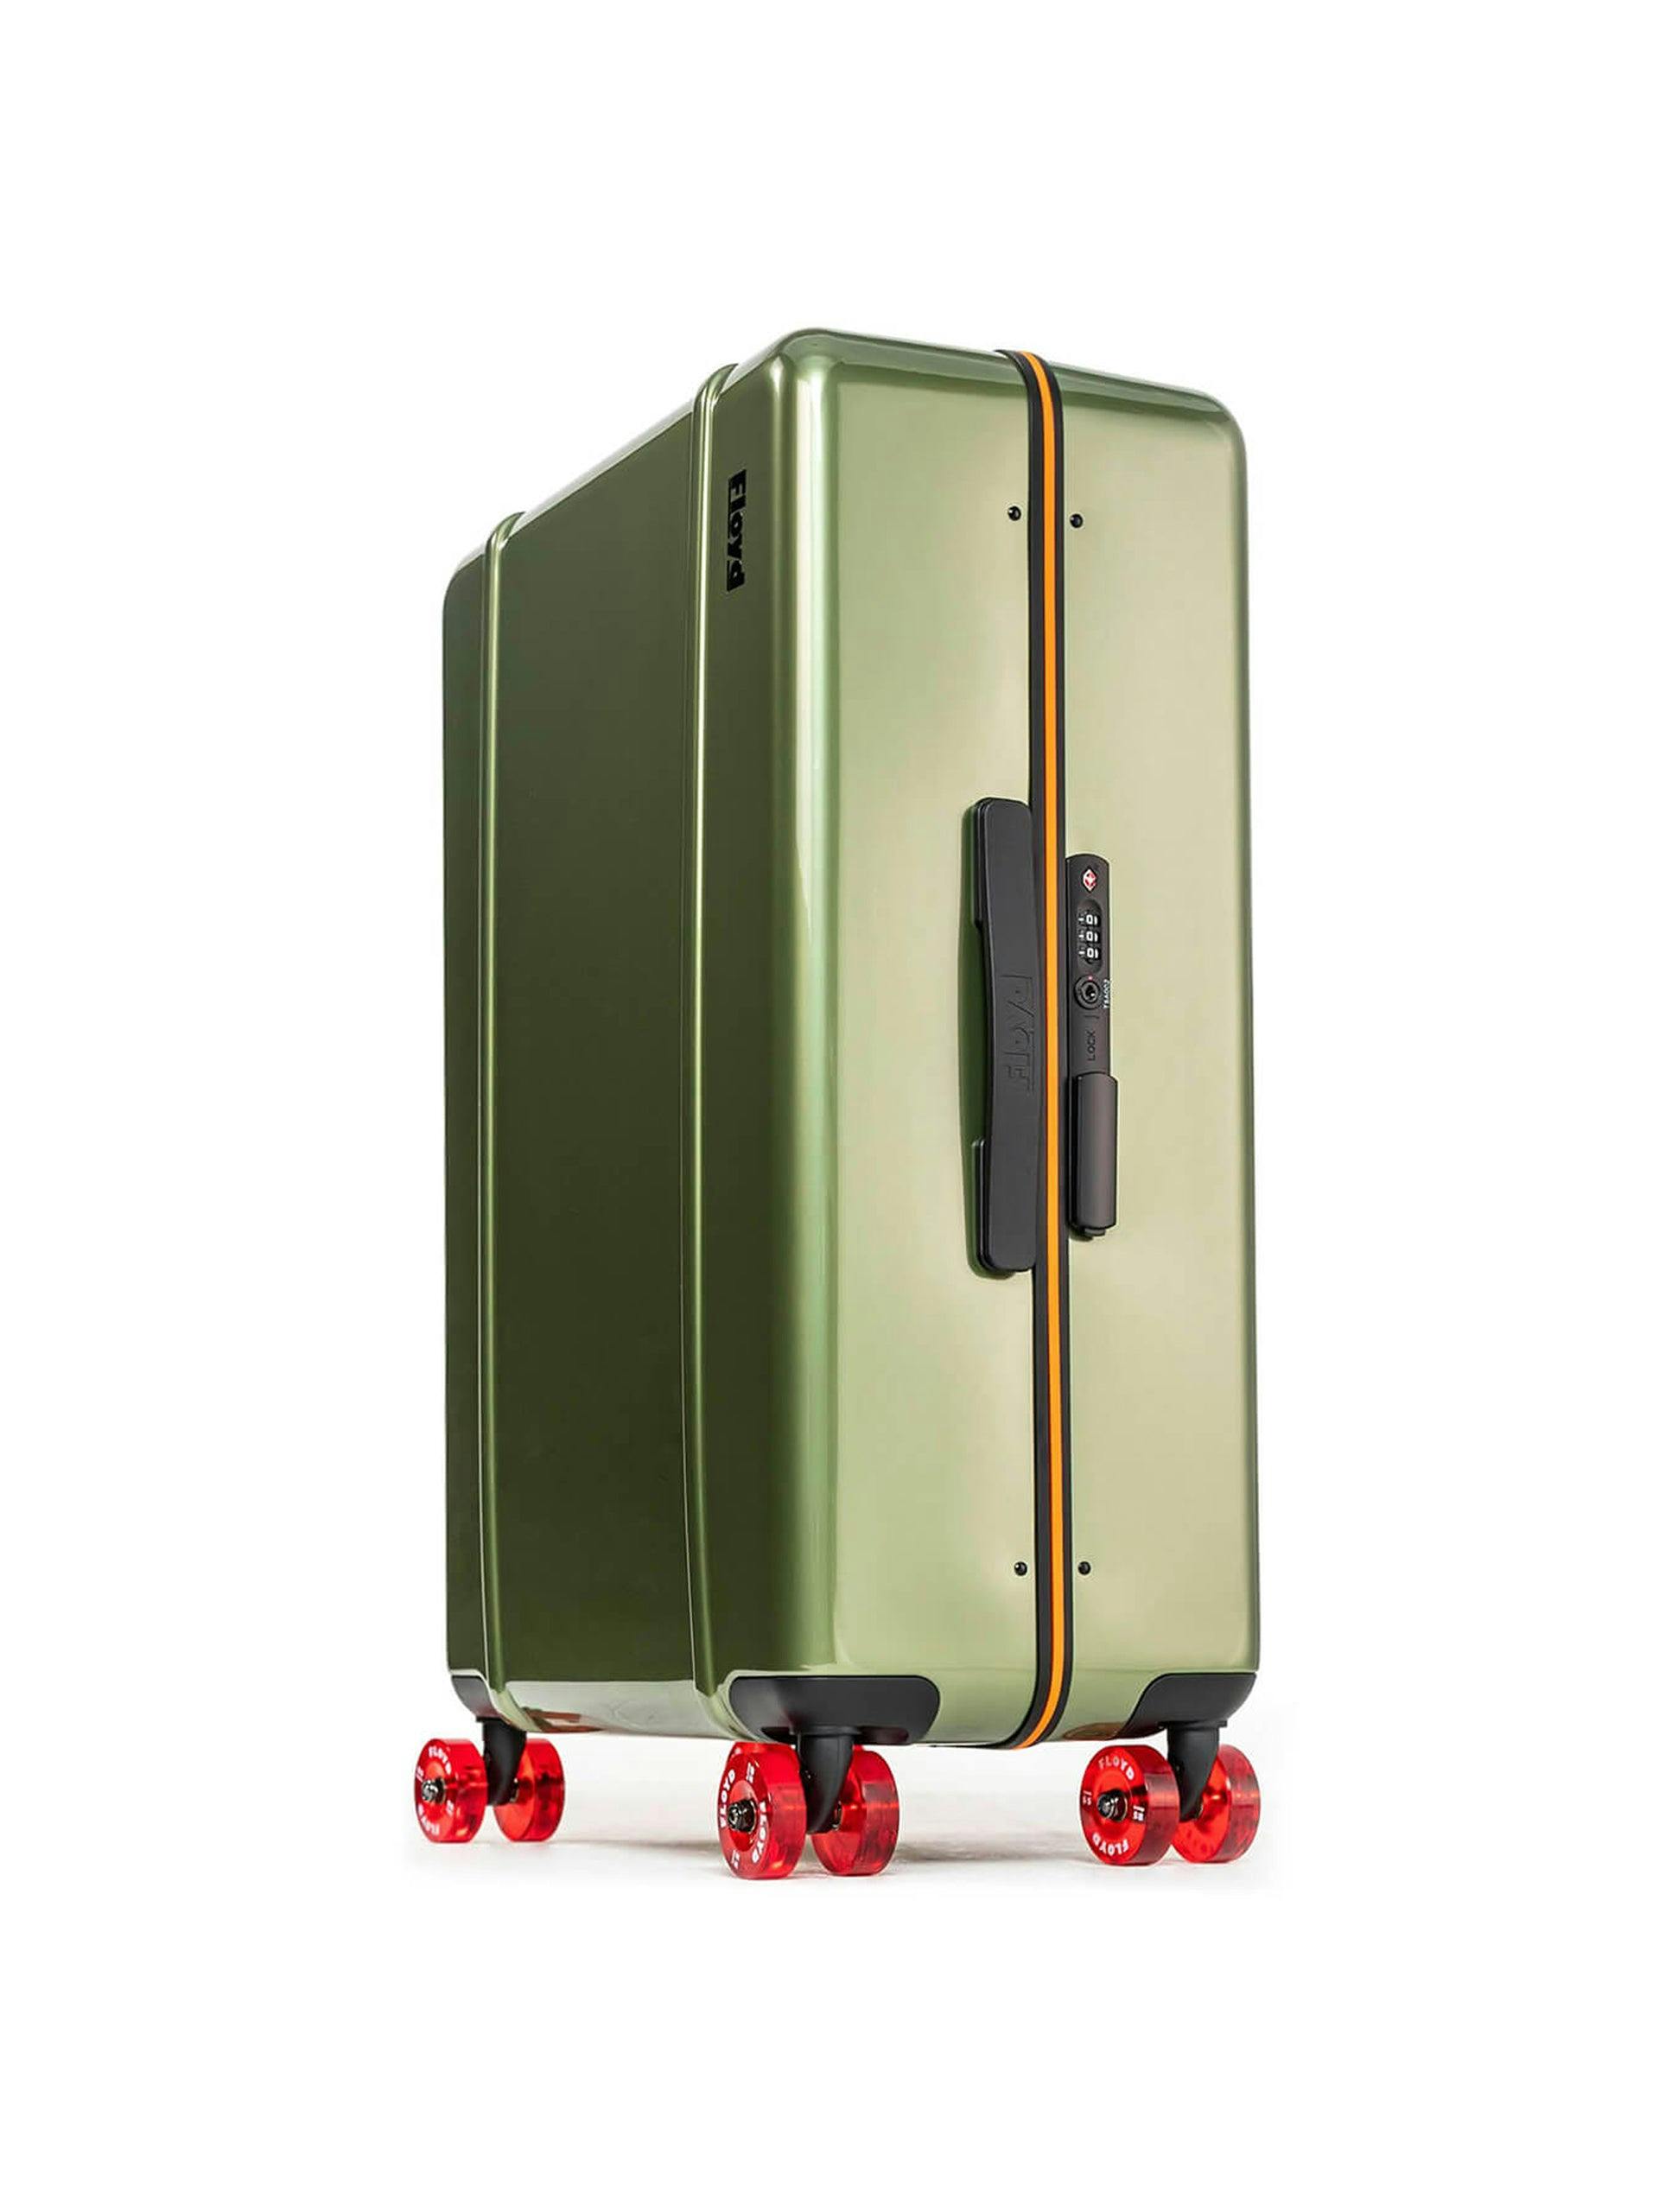 Hard shell check-in suitcase